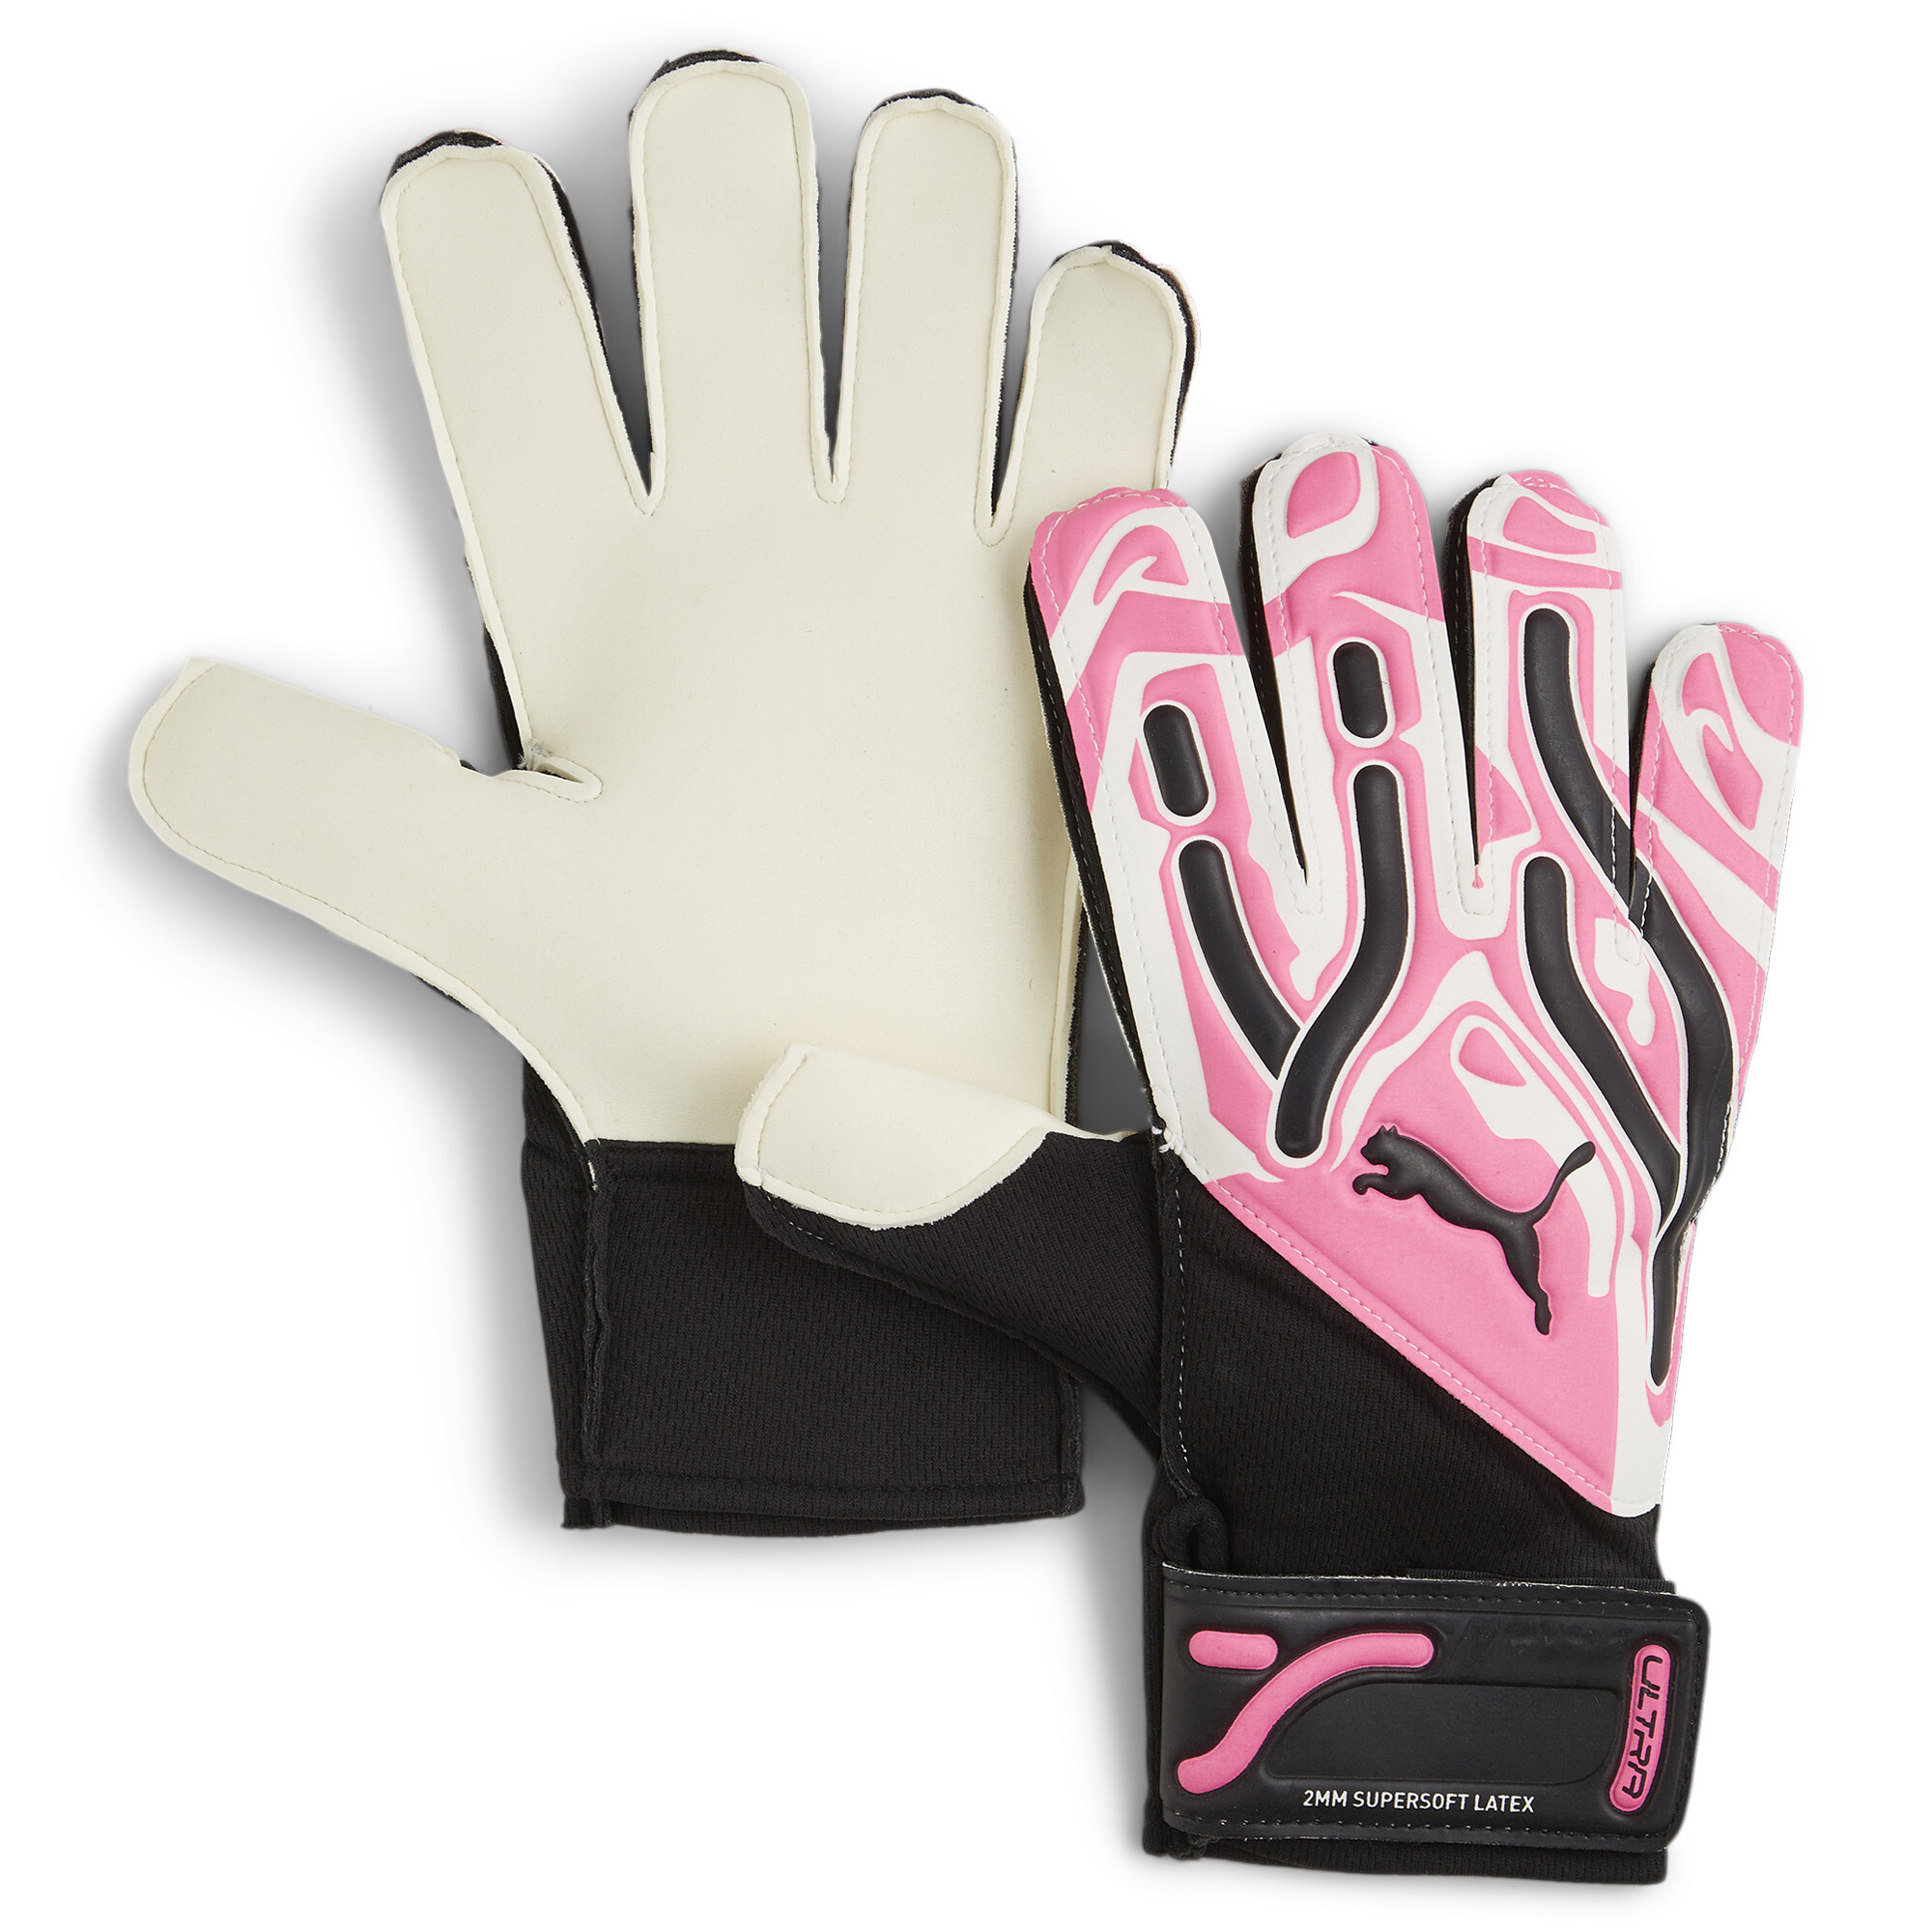 Men's PUMA ULTRA Play RC Goalkeeper Gloves In Pink, Size UK 11